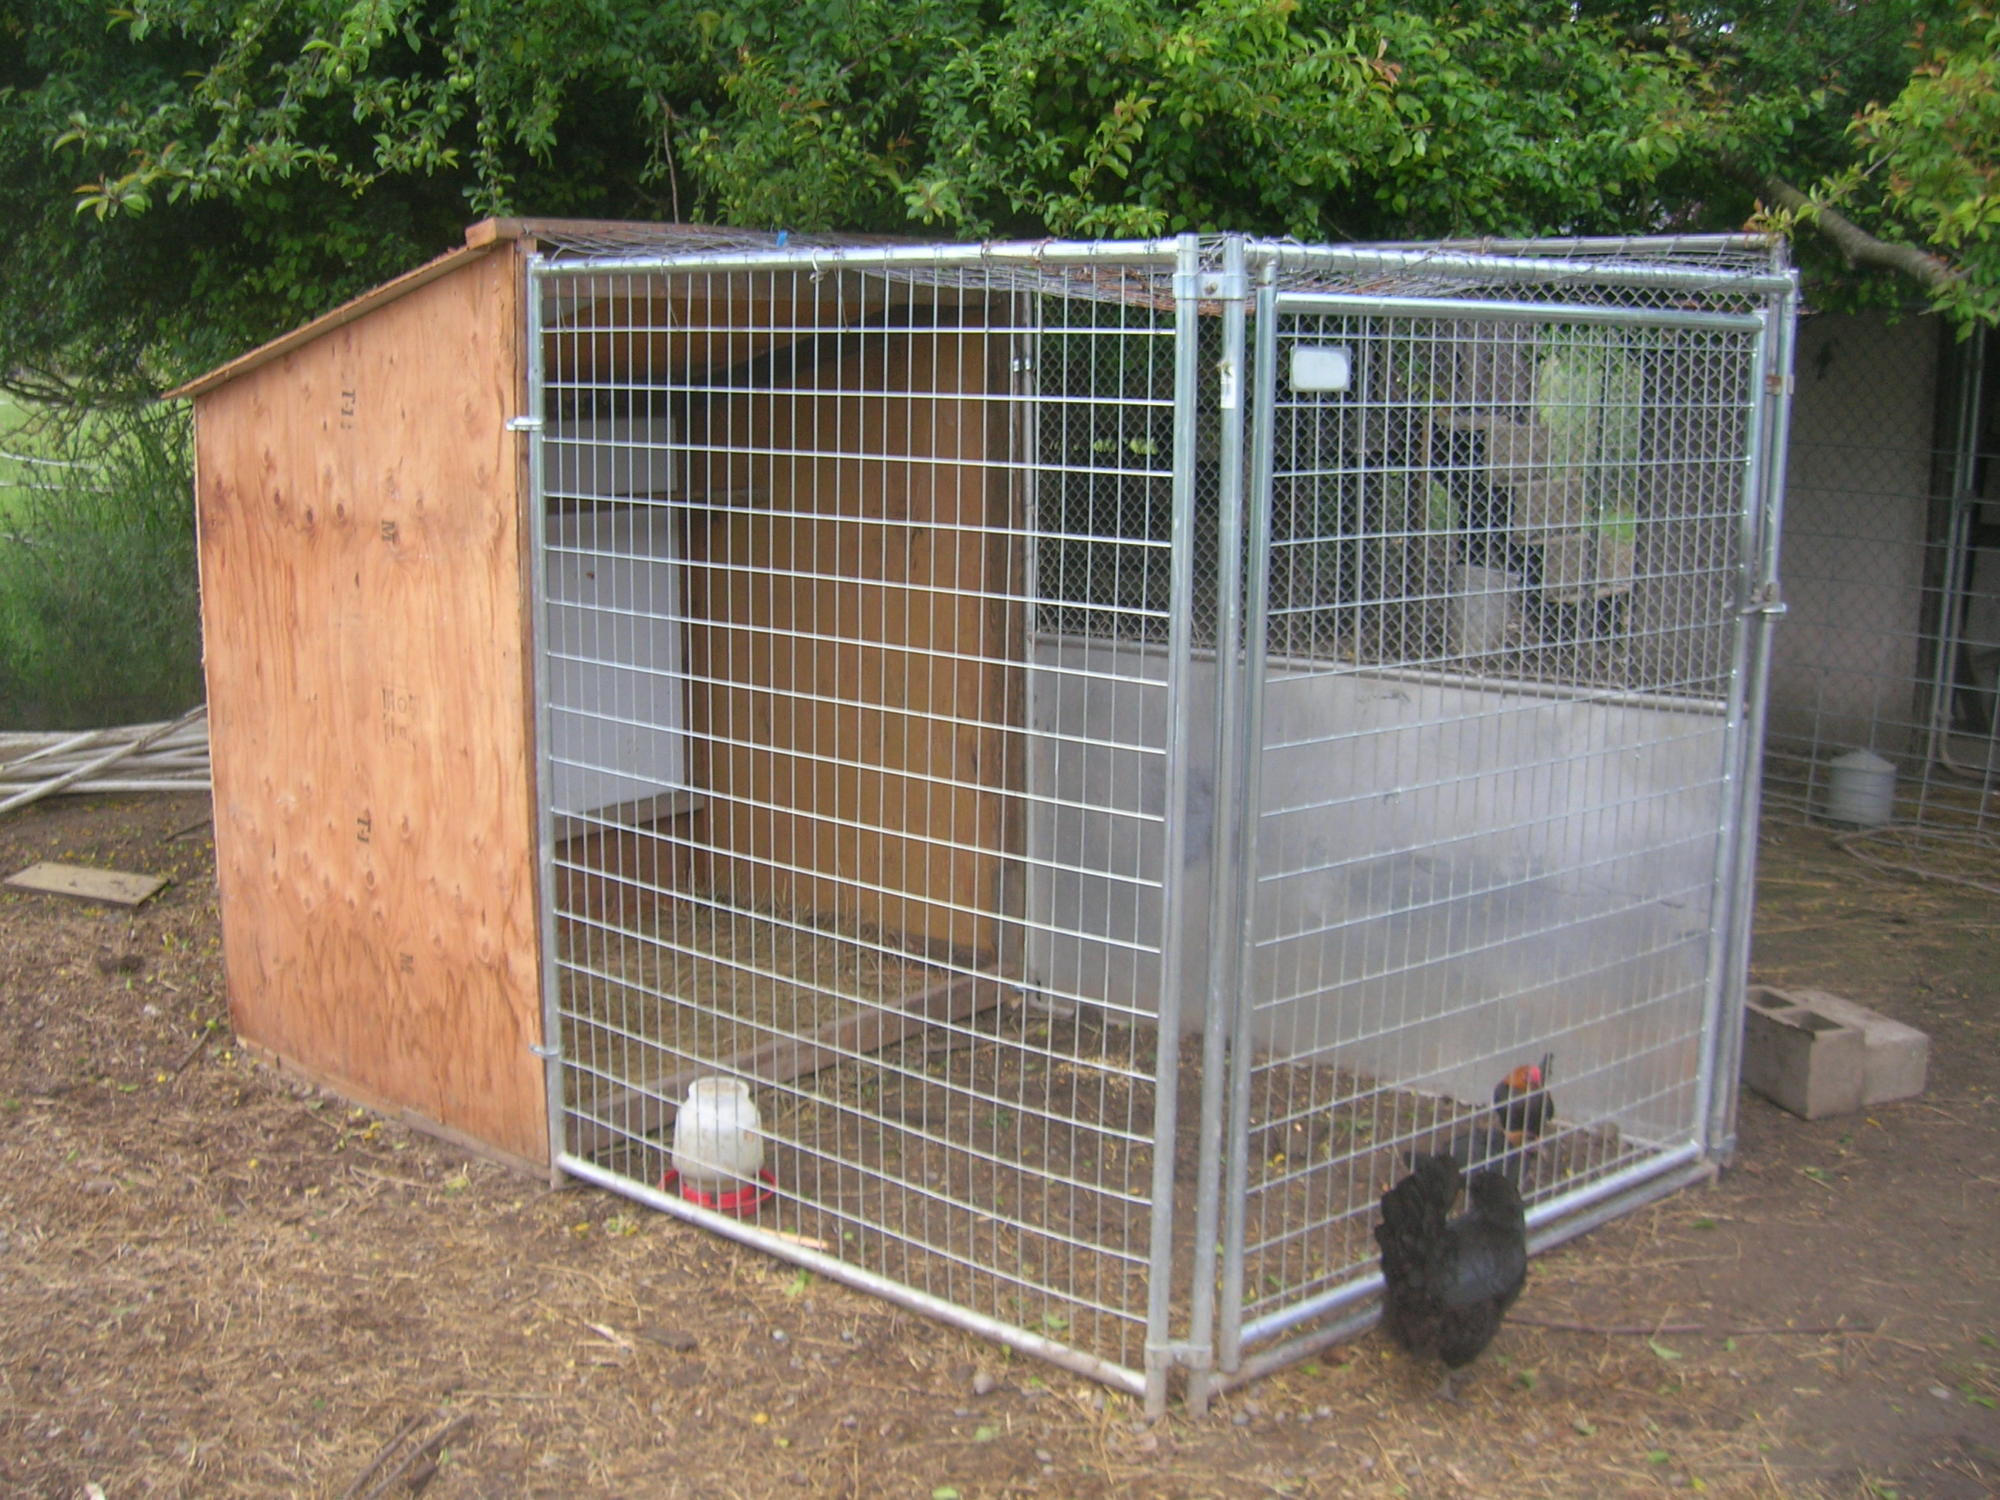 My breeding pen attempt... | BackYard Chickens - Learn How to Raise Chickens